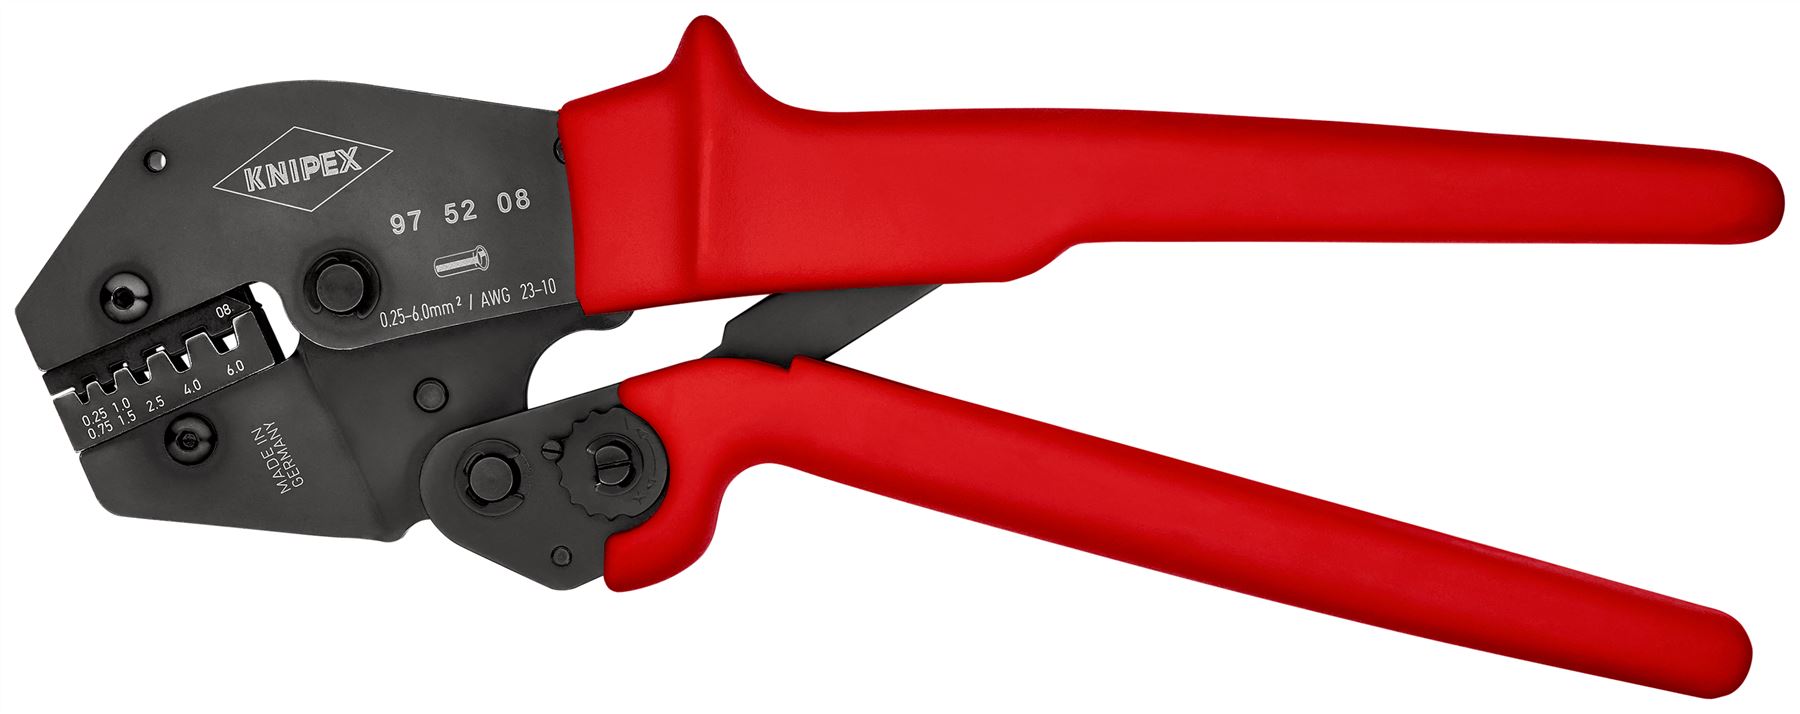 KNIPEX Crimping Pliers Two Hand Operation for Solder Free Electrical Connections 250mm 97 52 08